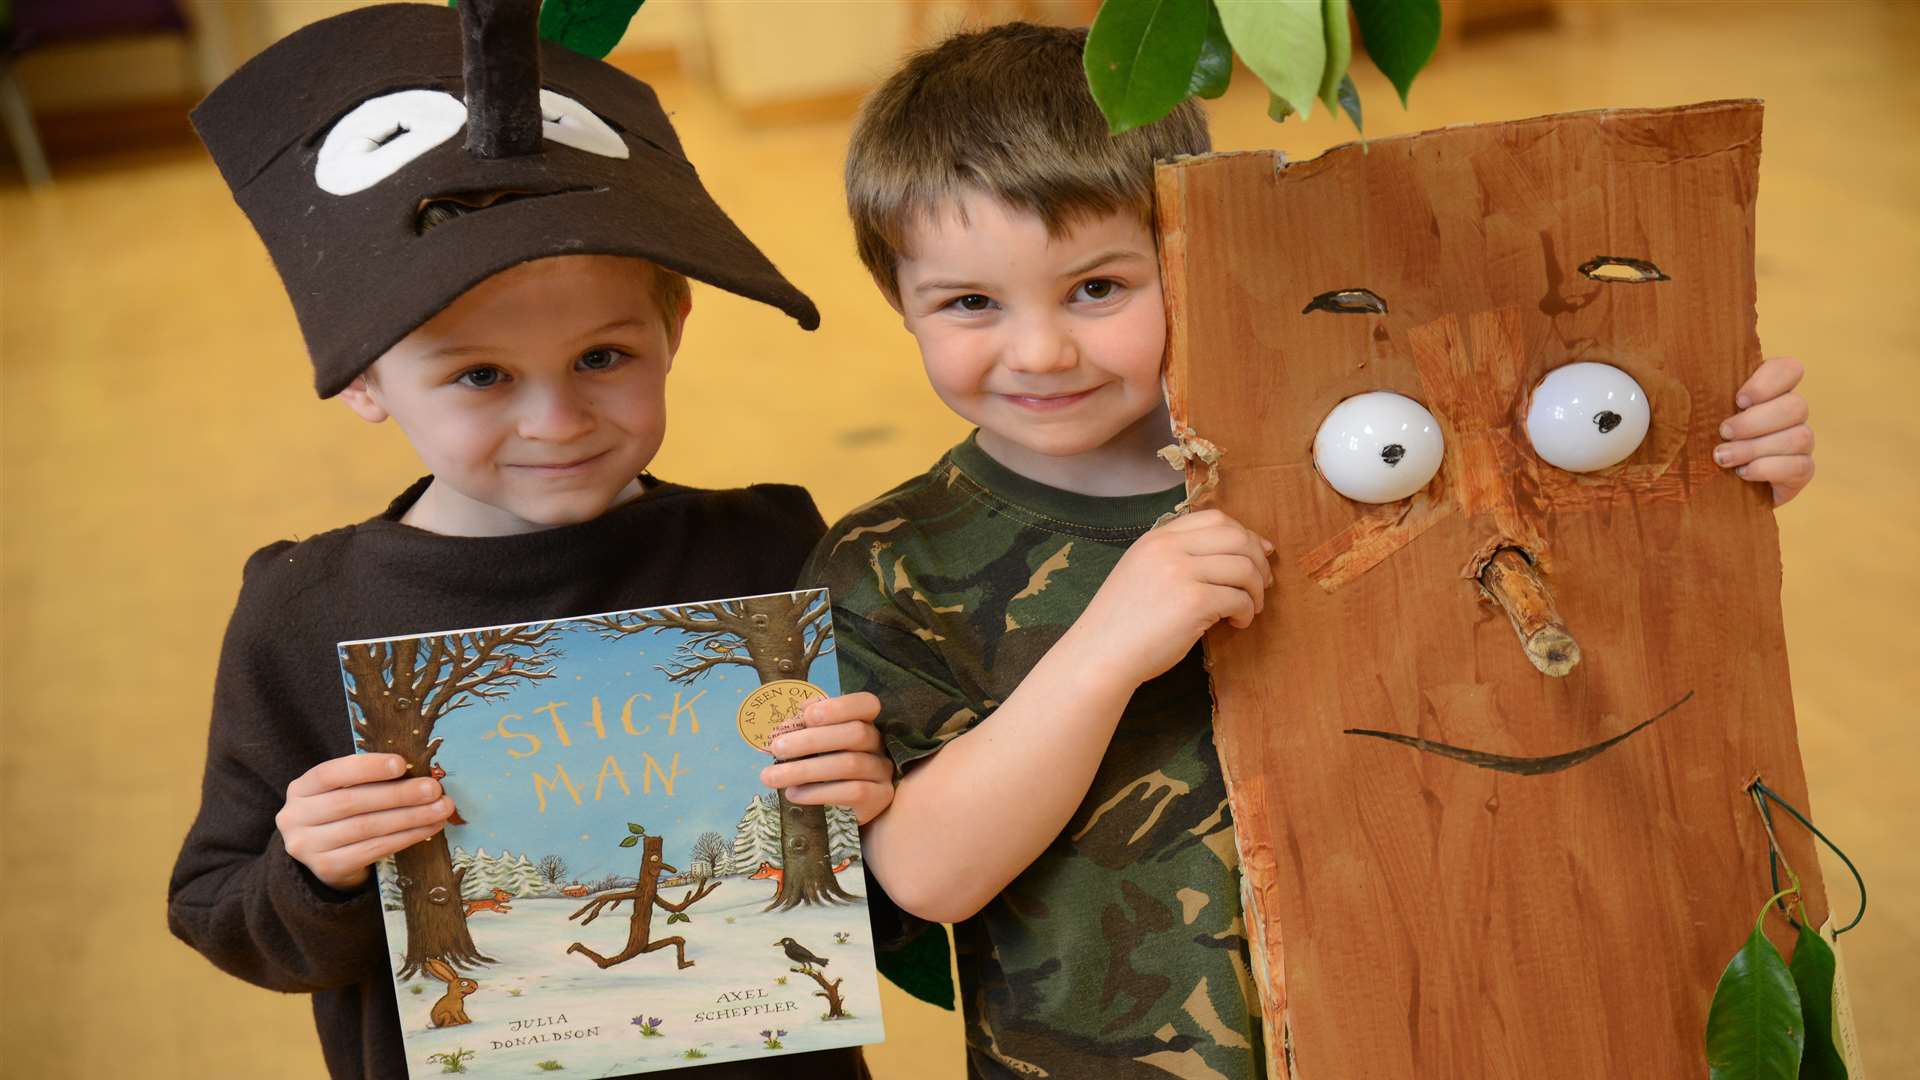 Cameron and Hector dress up for Julia Donaldson's book Stick Man at Leeds and Broomfield School last year Picture: Gary Browne